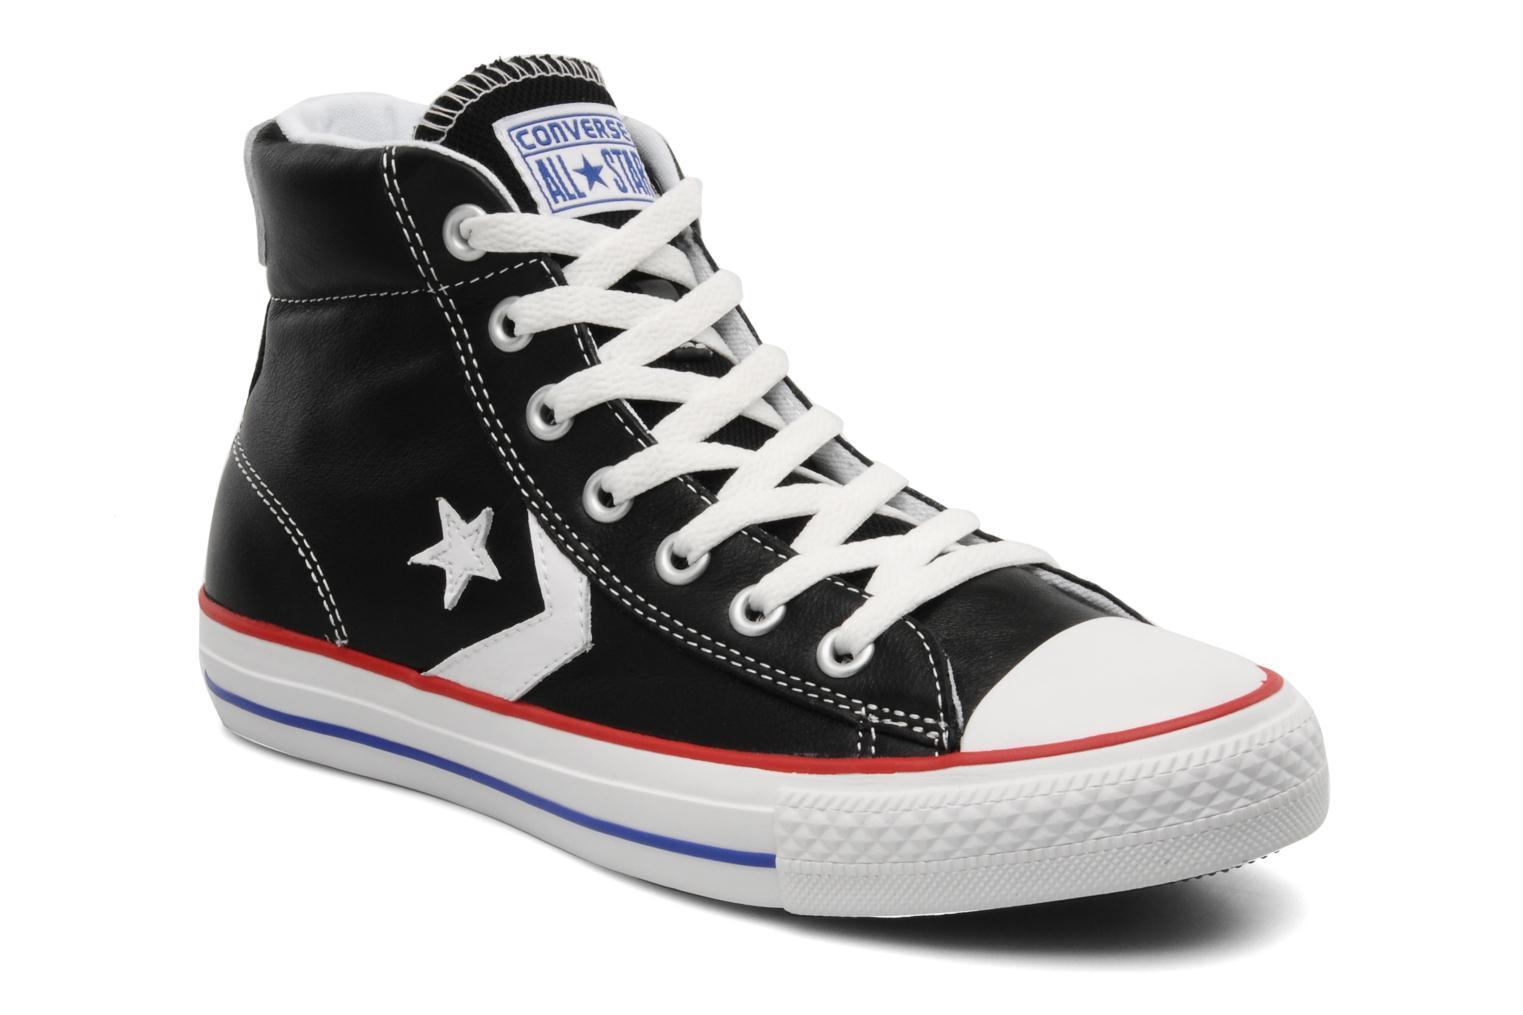 Foto Tenis moda Converse Star Player Leather Mid W Mujer foto 53442